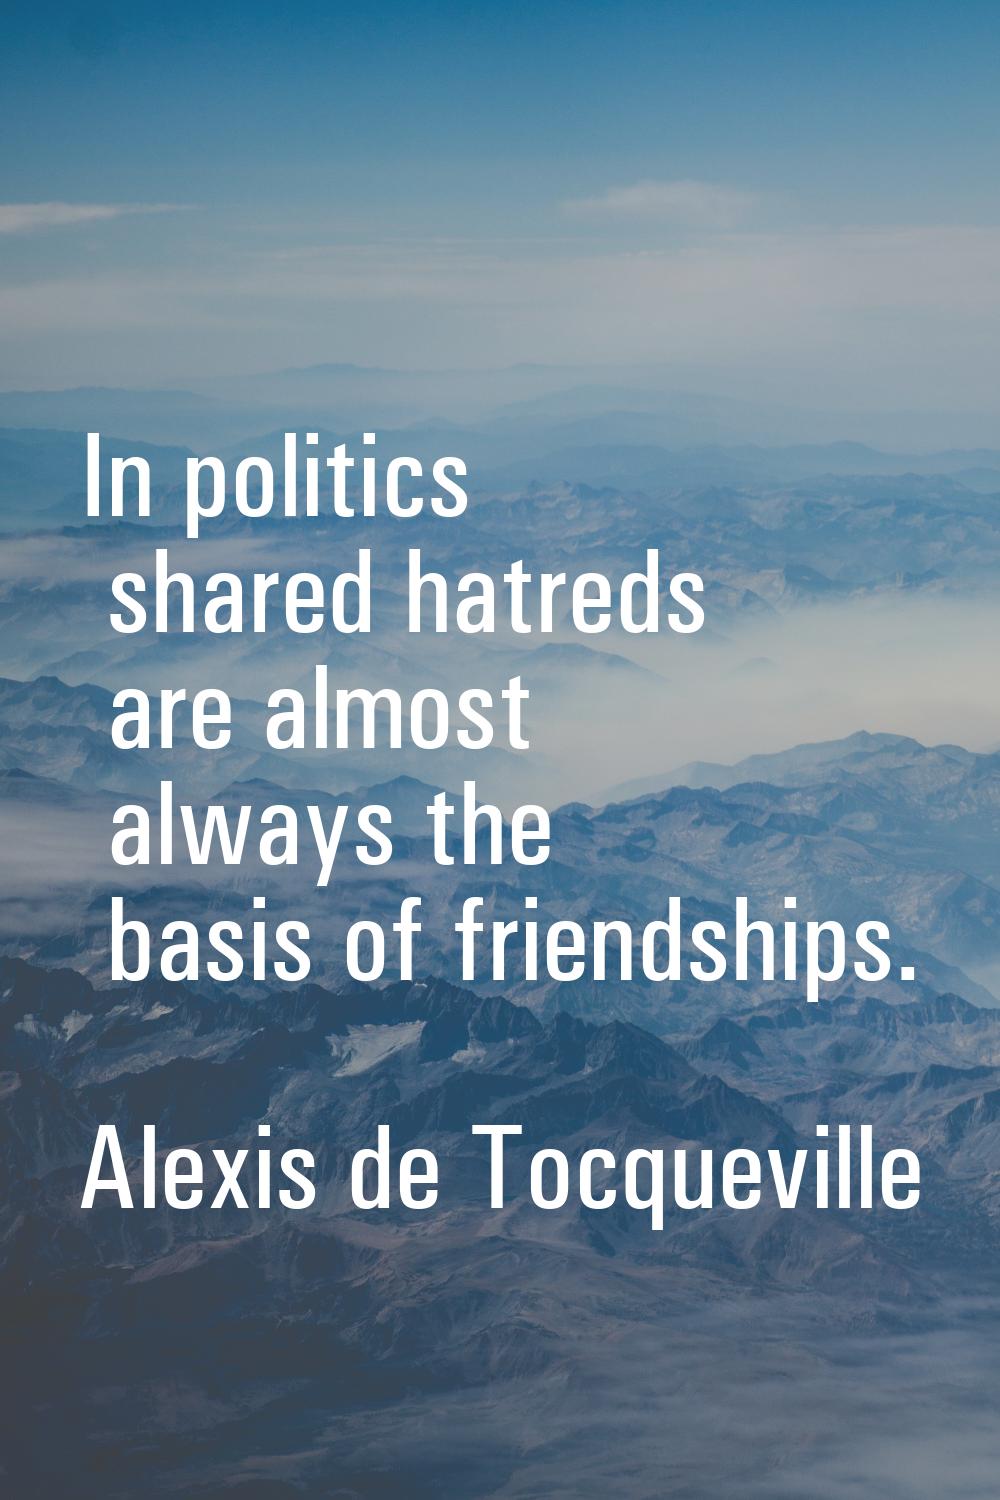 In politics shared hatreds are almost always the basis of friendships.